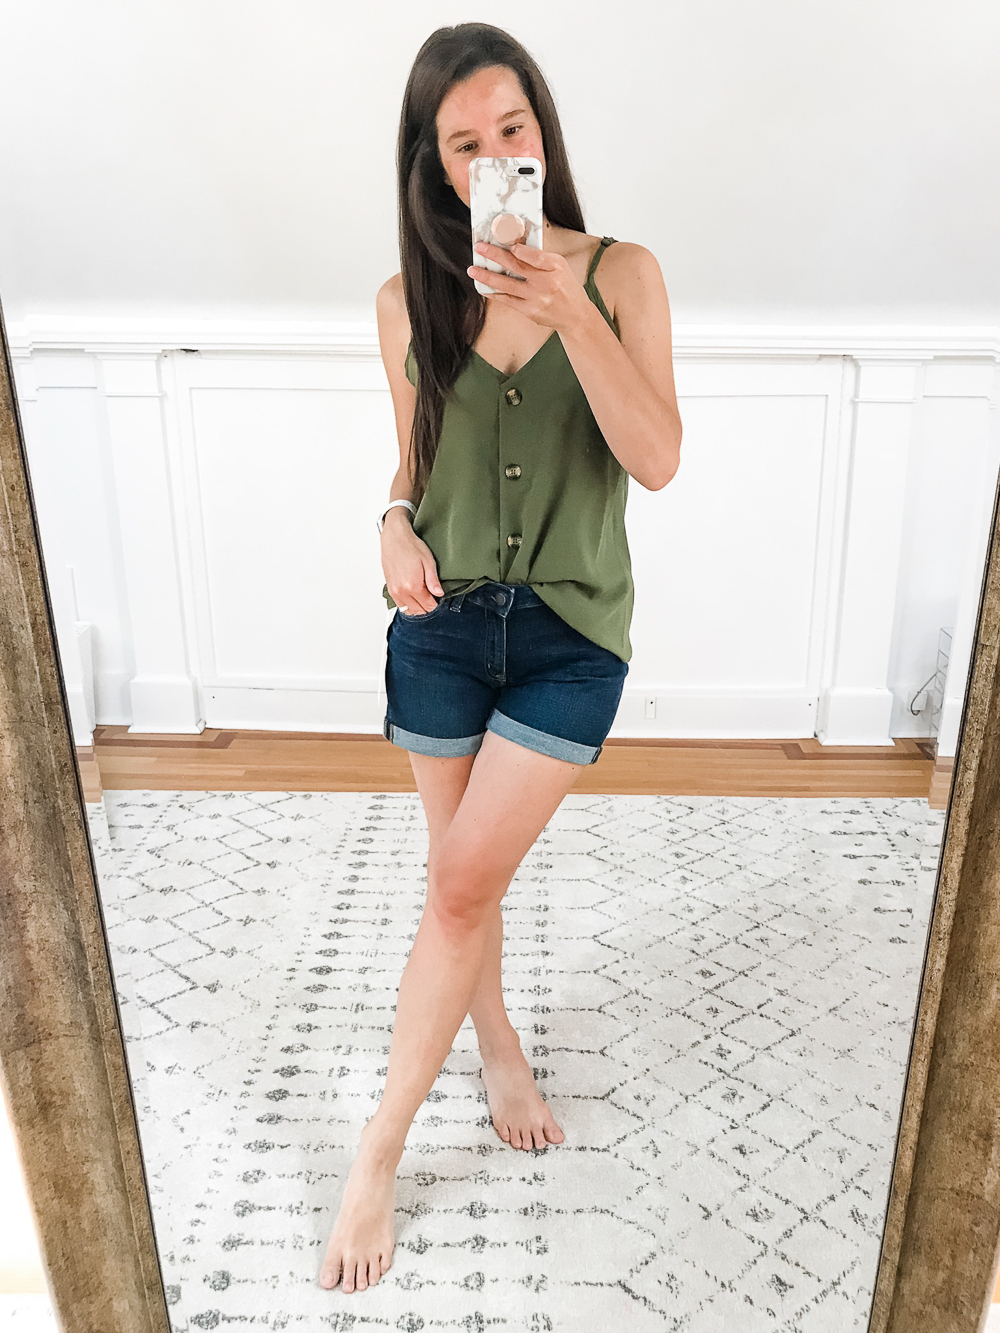 Amazon Loose Green Button Down Tank Top and Amazon Basics 5" Cuffed Denim Shorts, Amazon Prime Day Try-On Haul: Top Affordable Fashion Finds